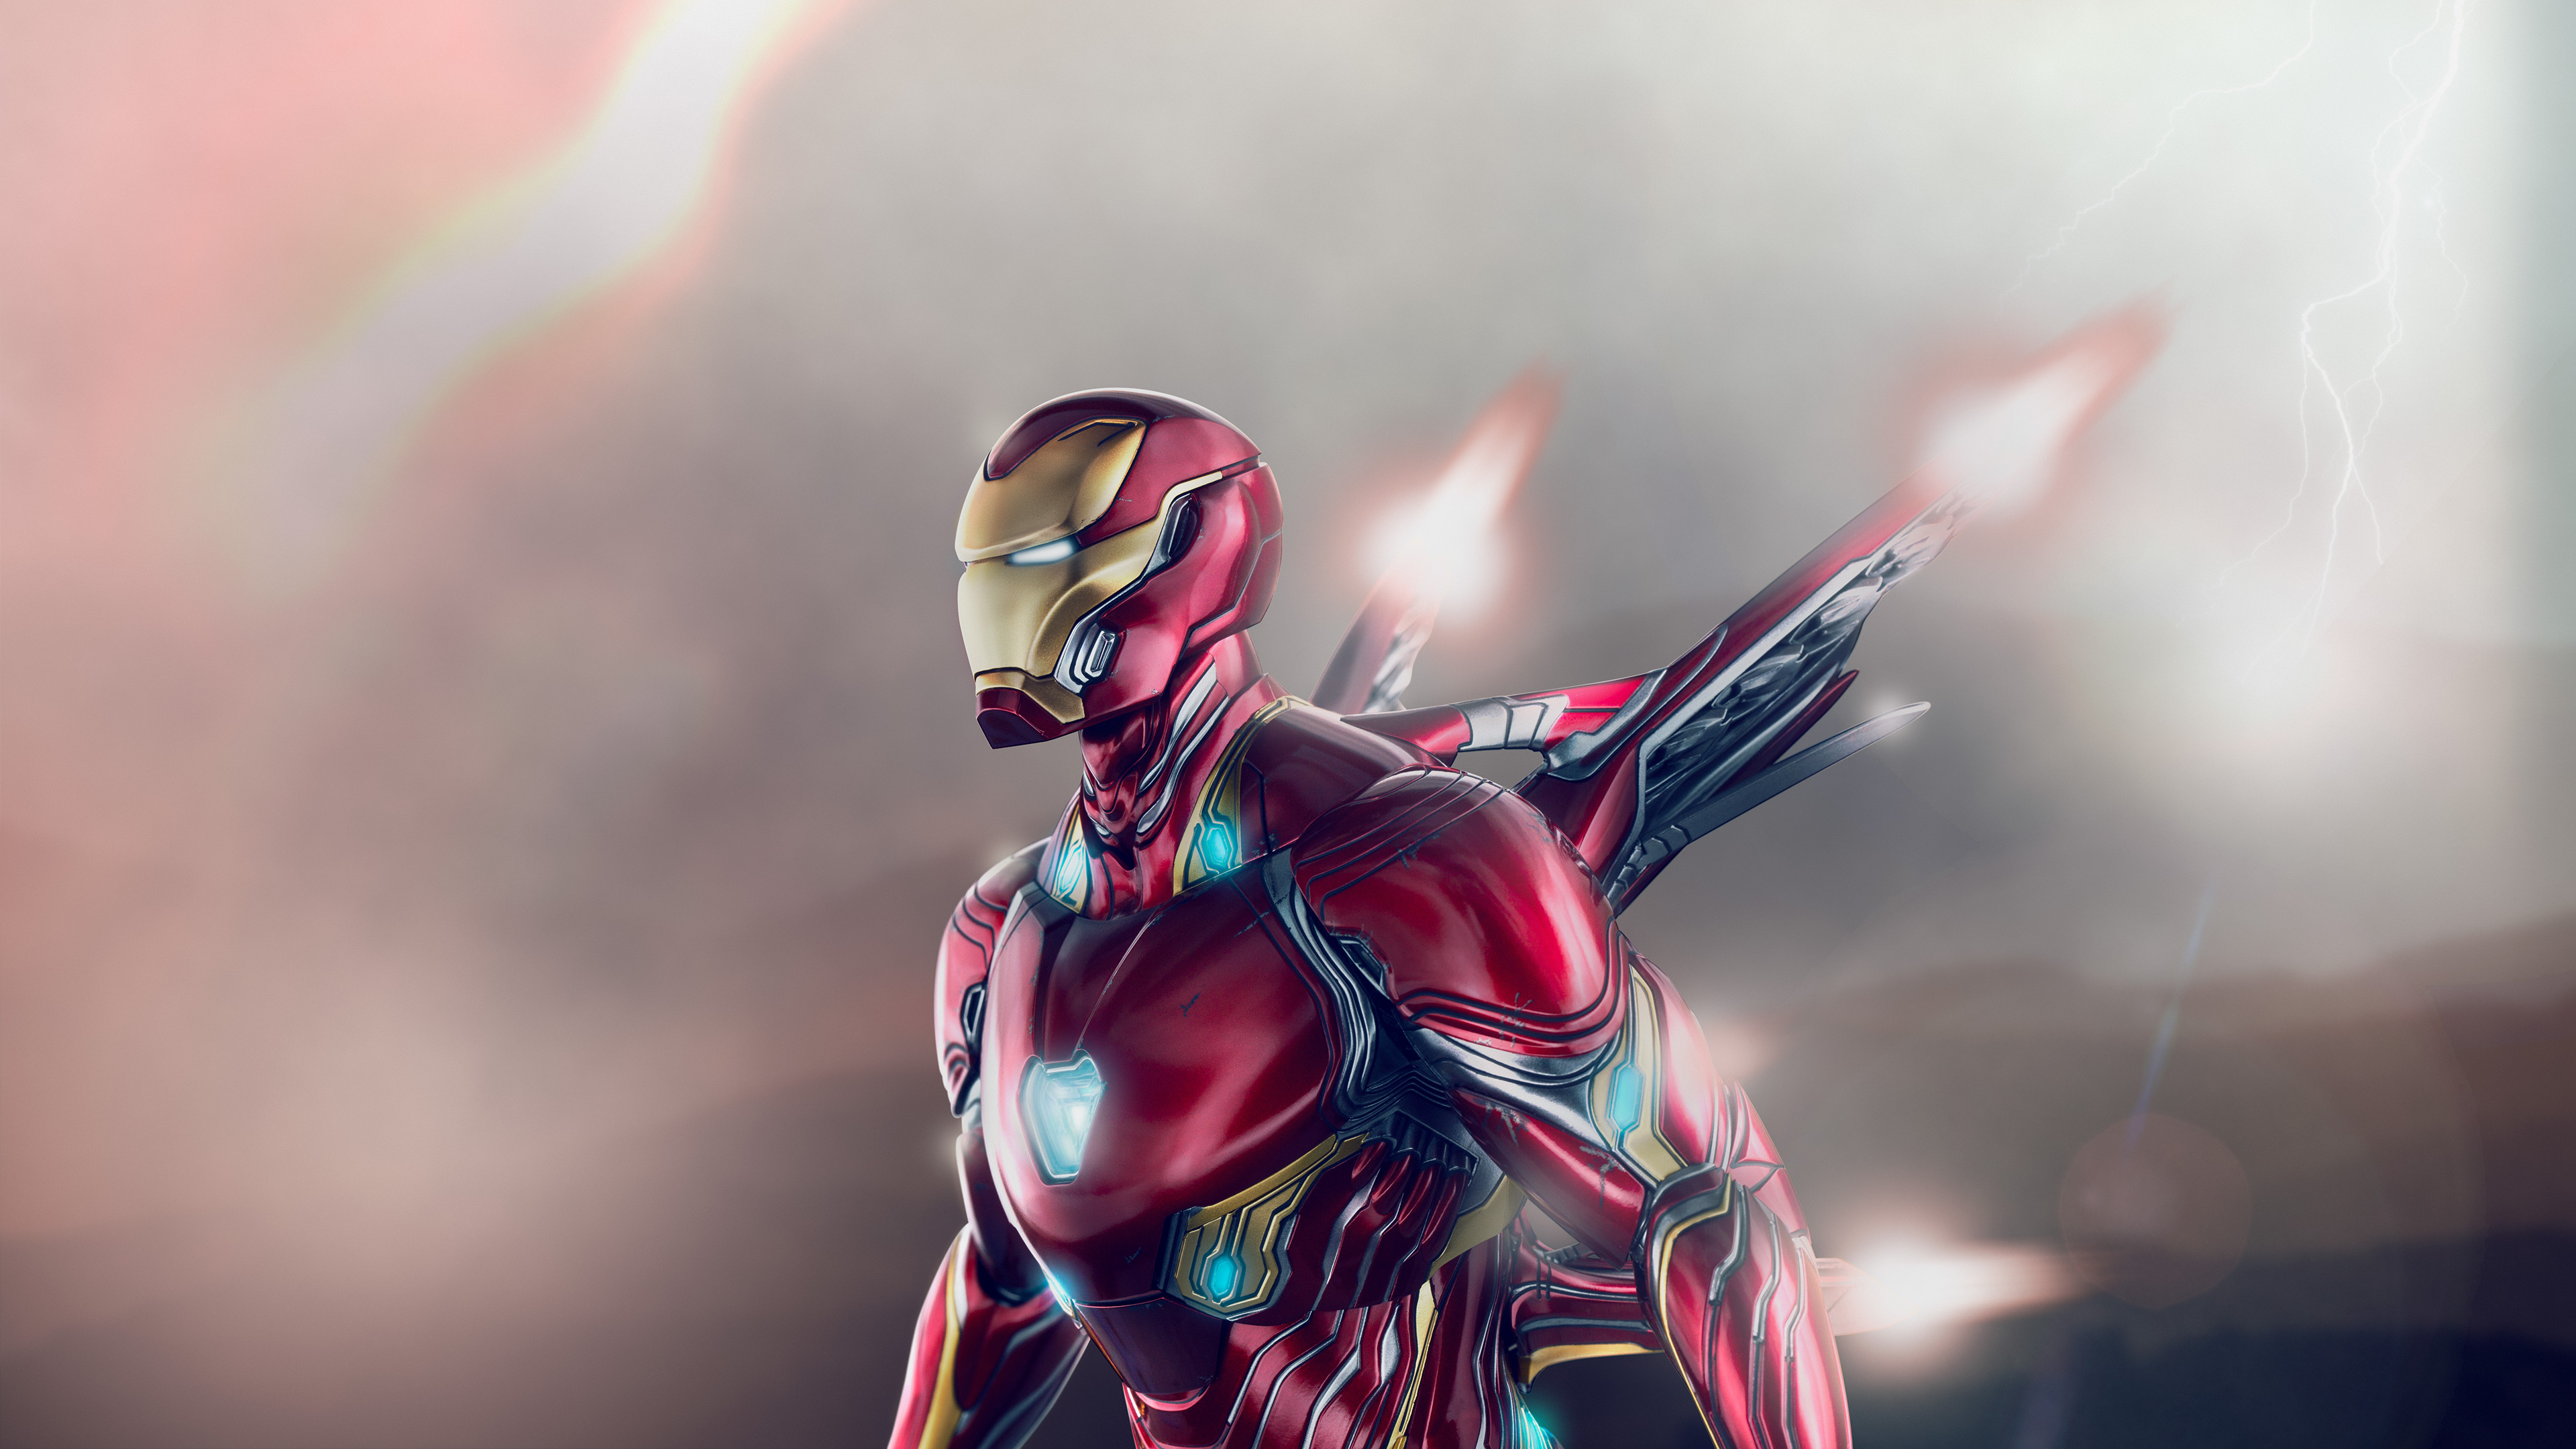 iron man wing suit 4k 1616961289 - Iron Man Wing Suit 4k - Iron Man Wing Suit 4k wallpapers